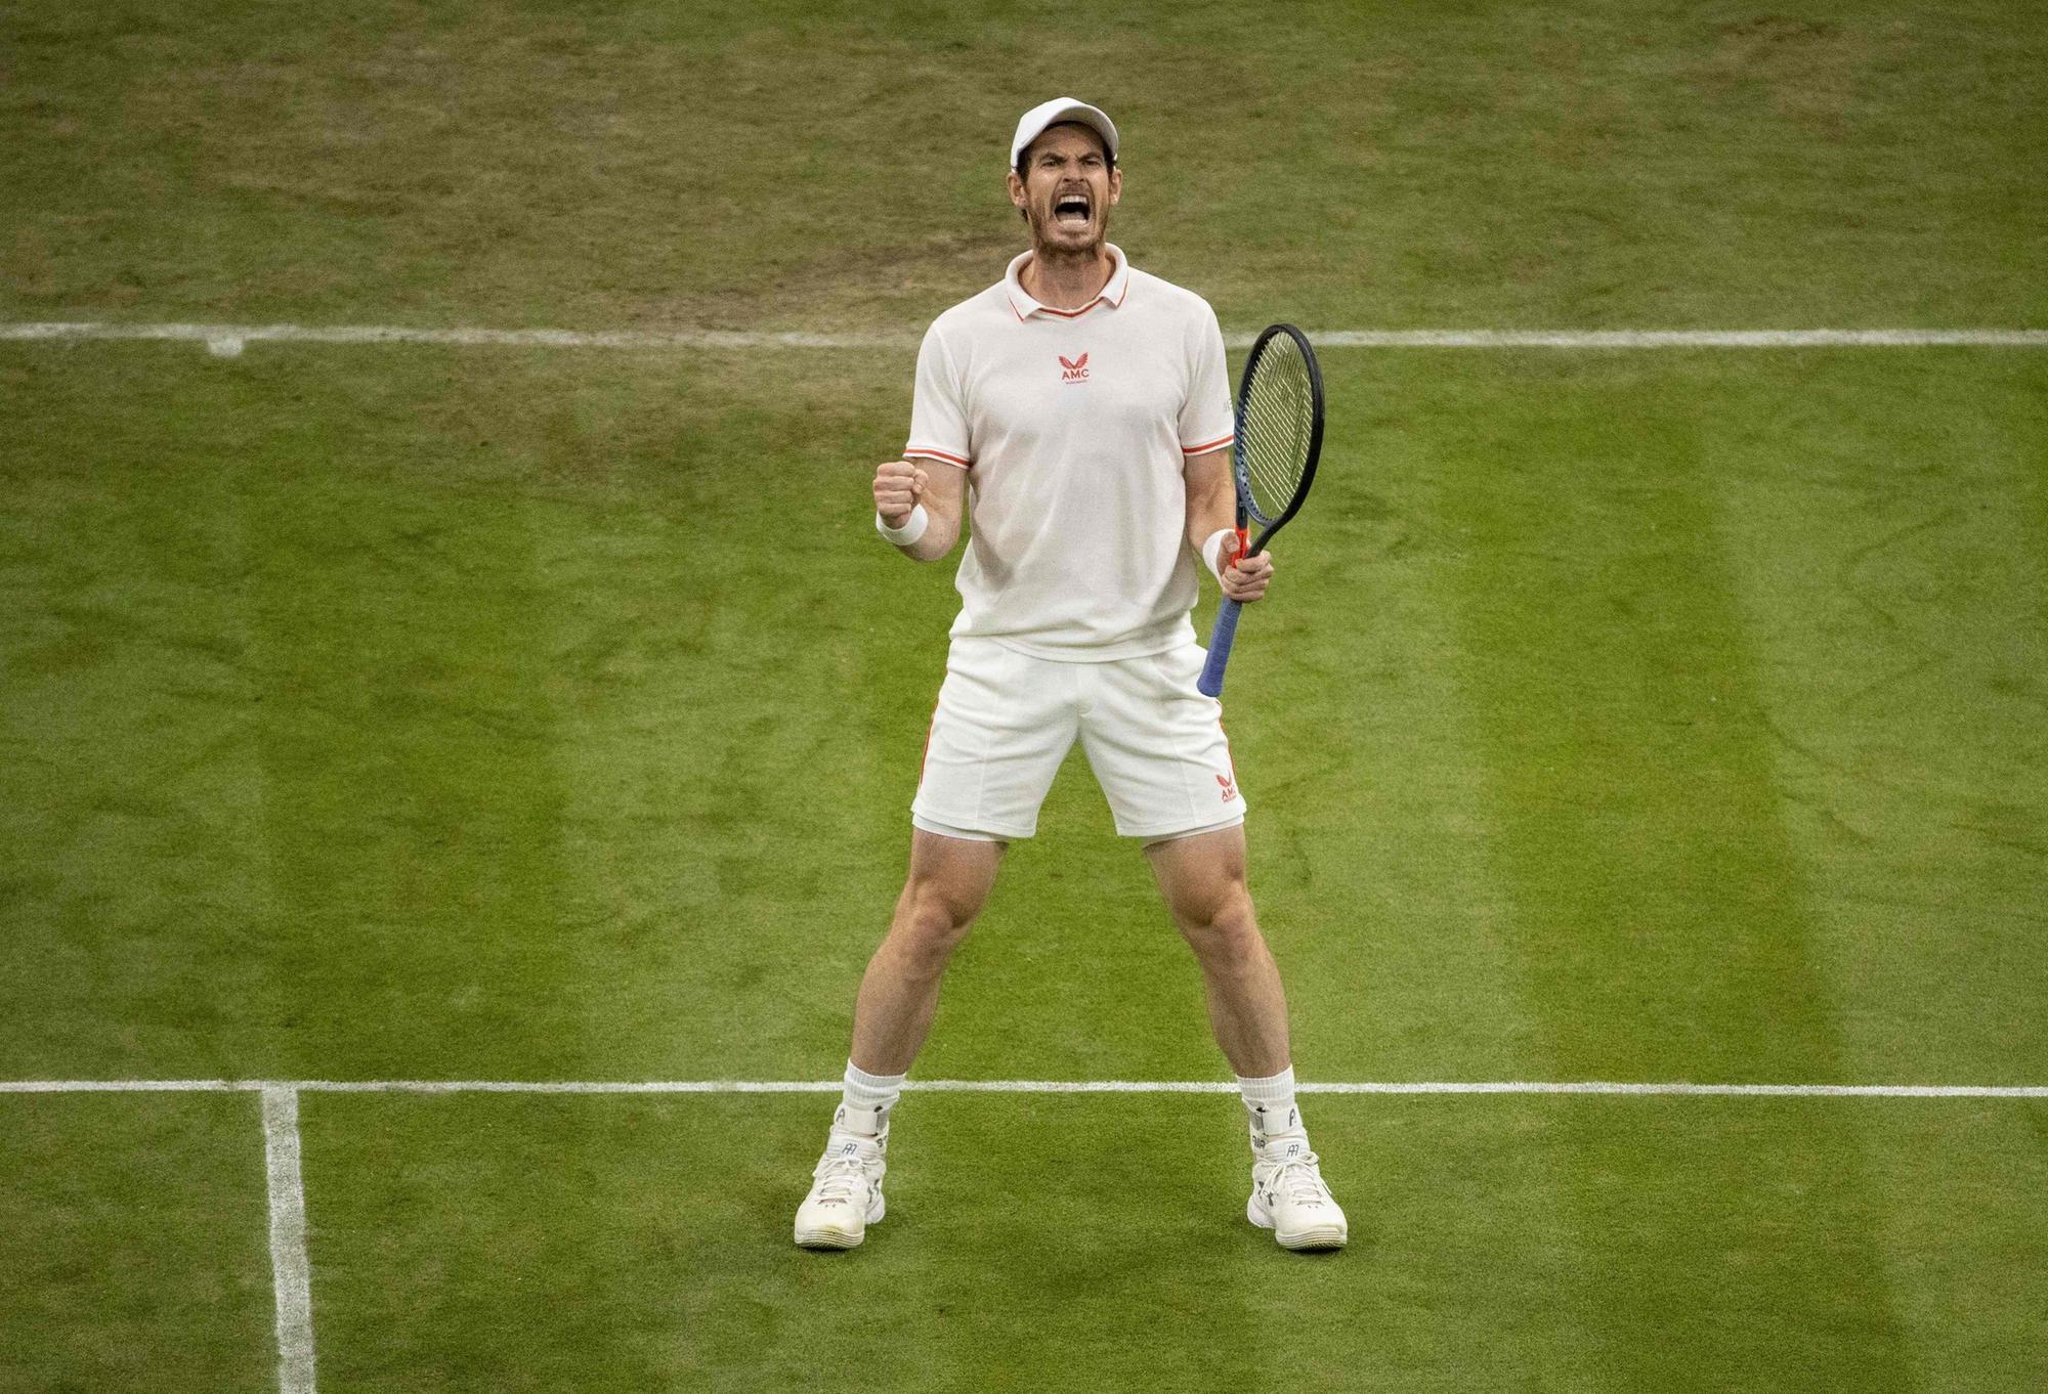 Wimbledon 2021: What time is Andy Murray playing today? Who is he playing?  What's his ranking? | The Scotsman